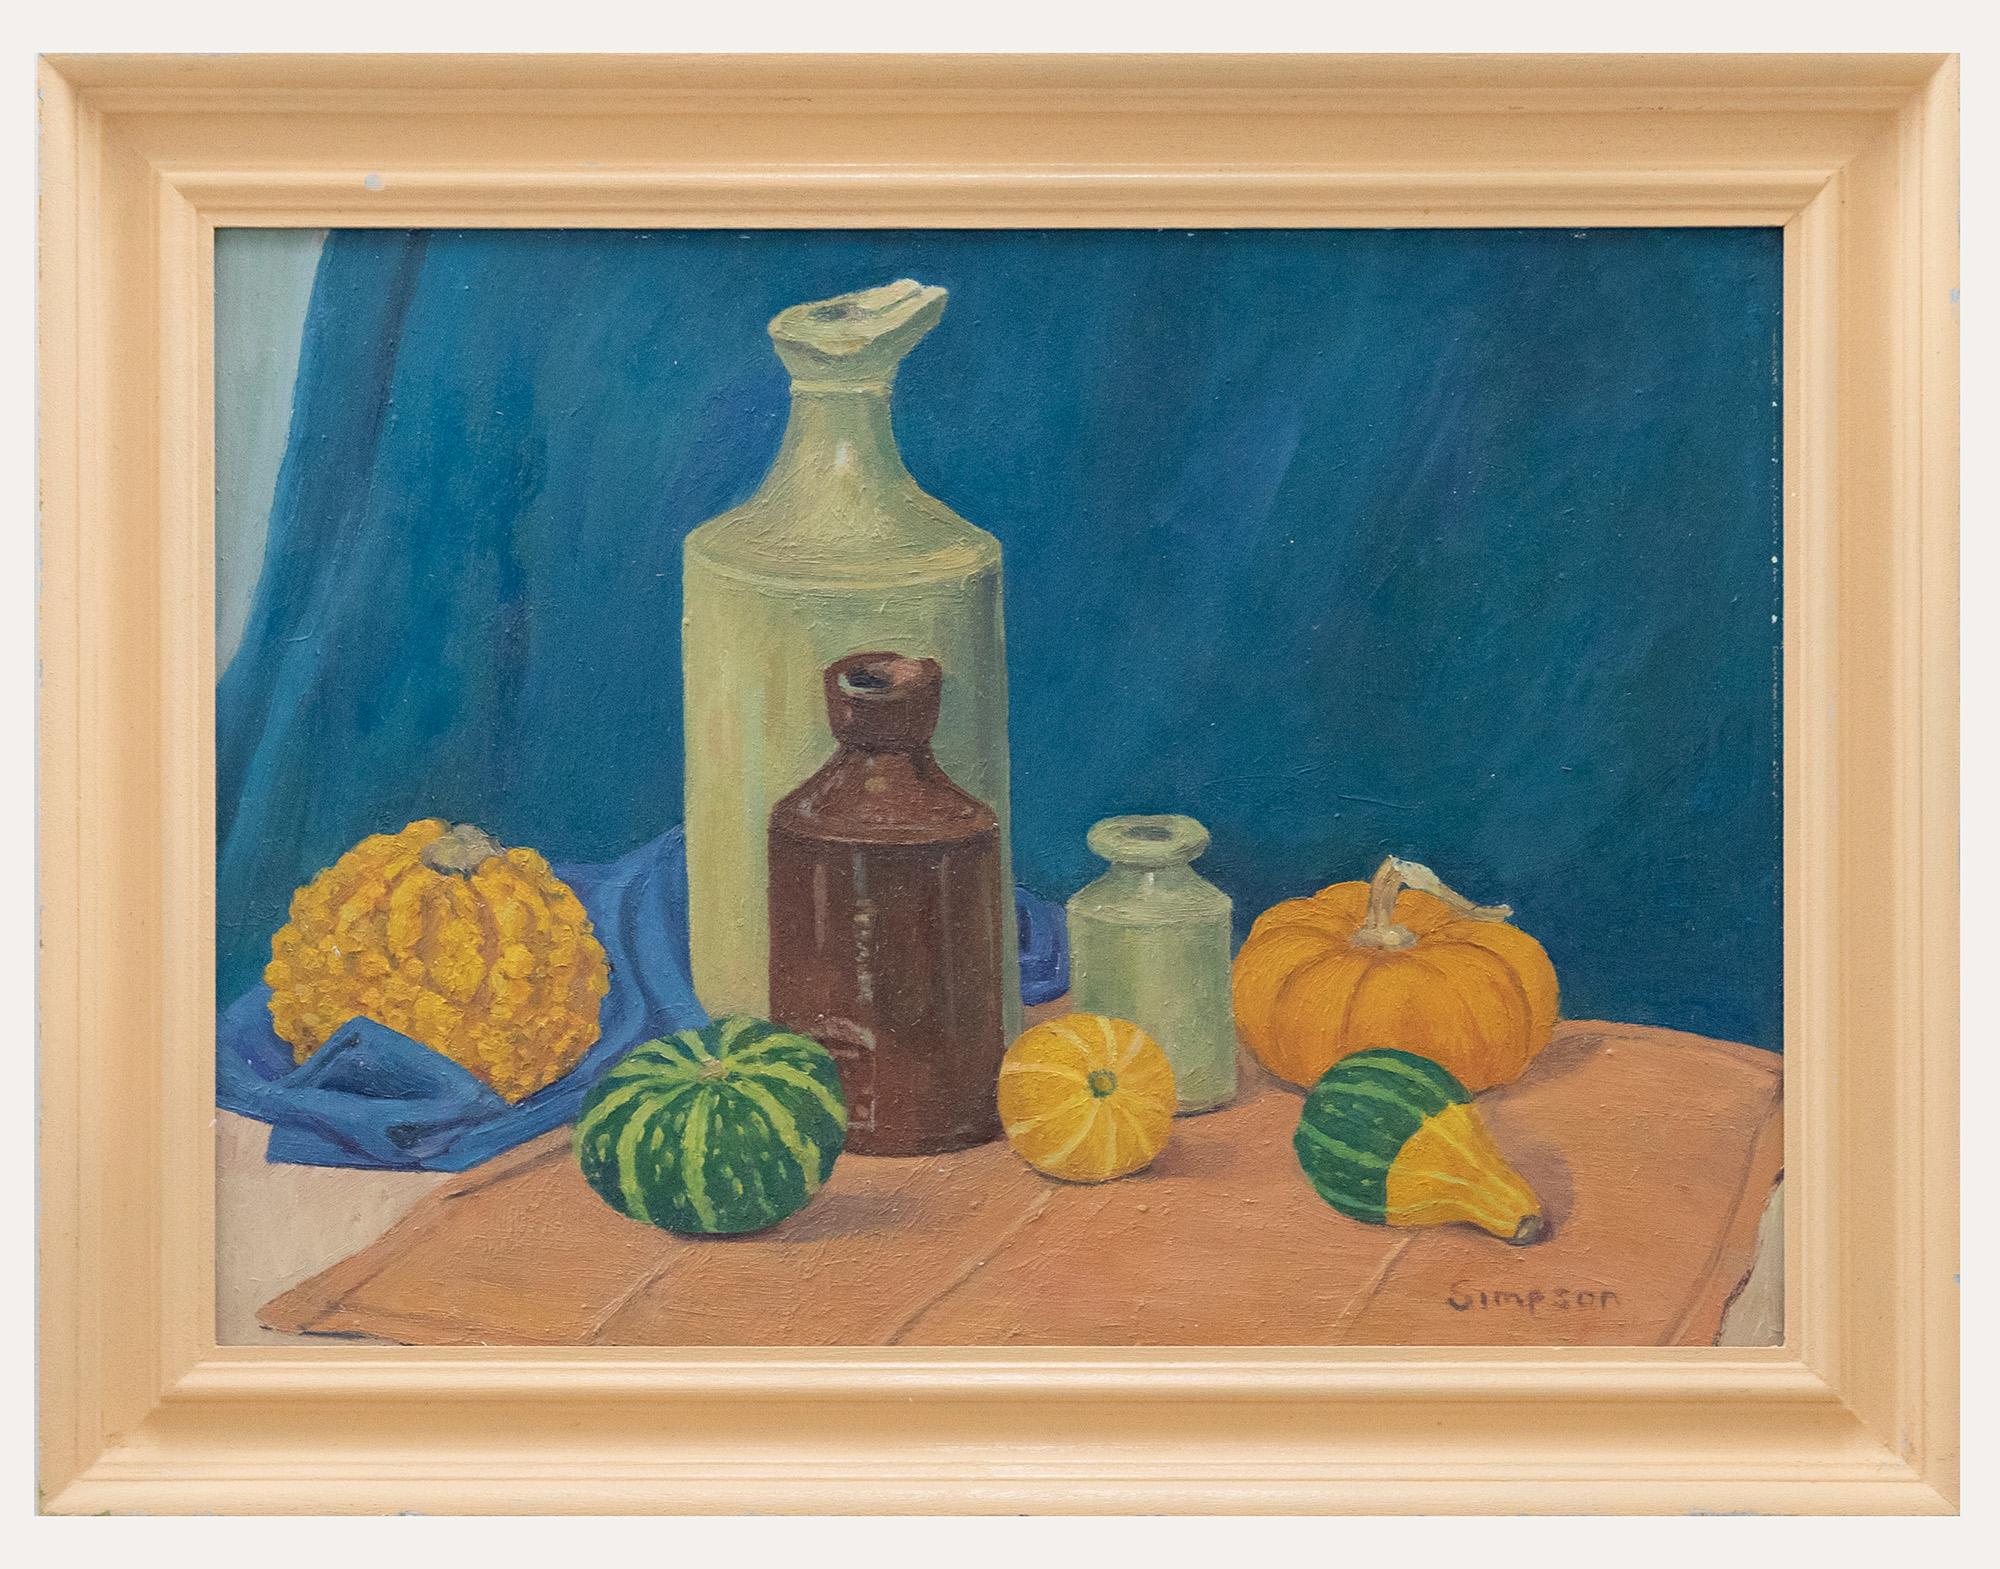 Unknown Still-Life Painting - J. Simpson - Contemporary Oil, Ceramics and Gourds